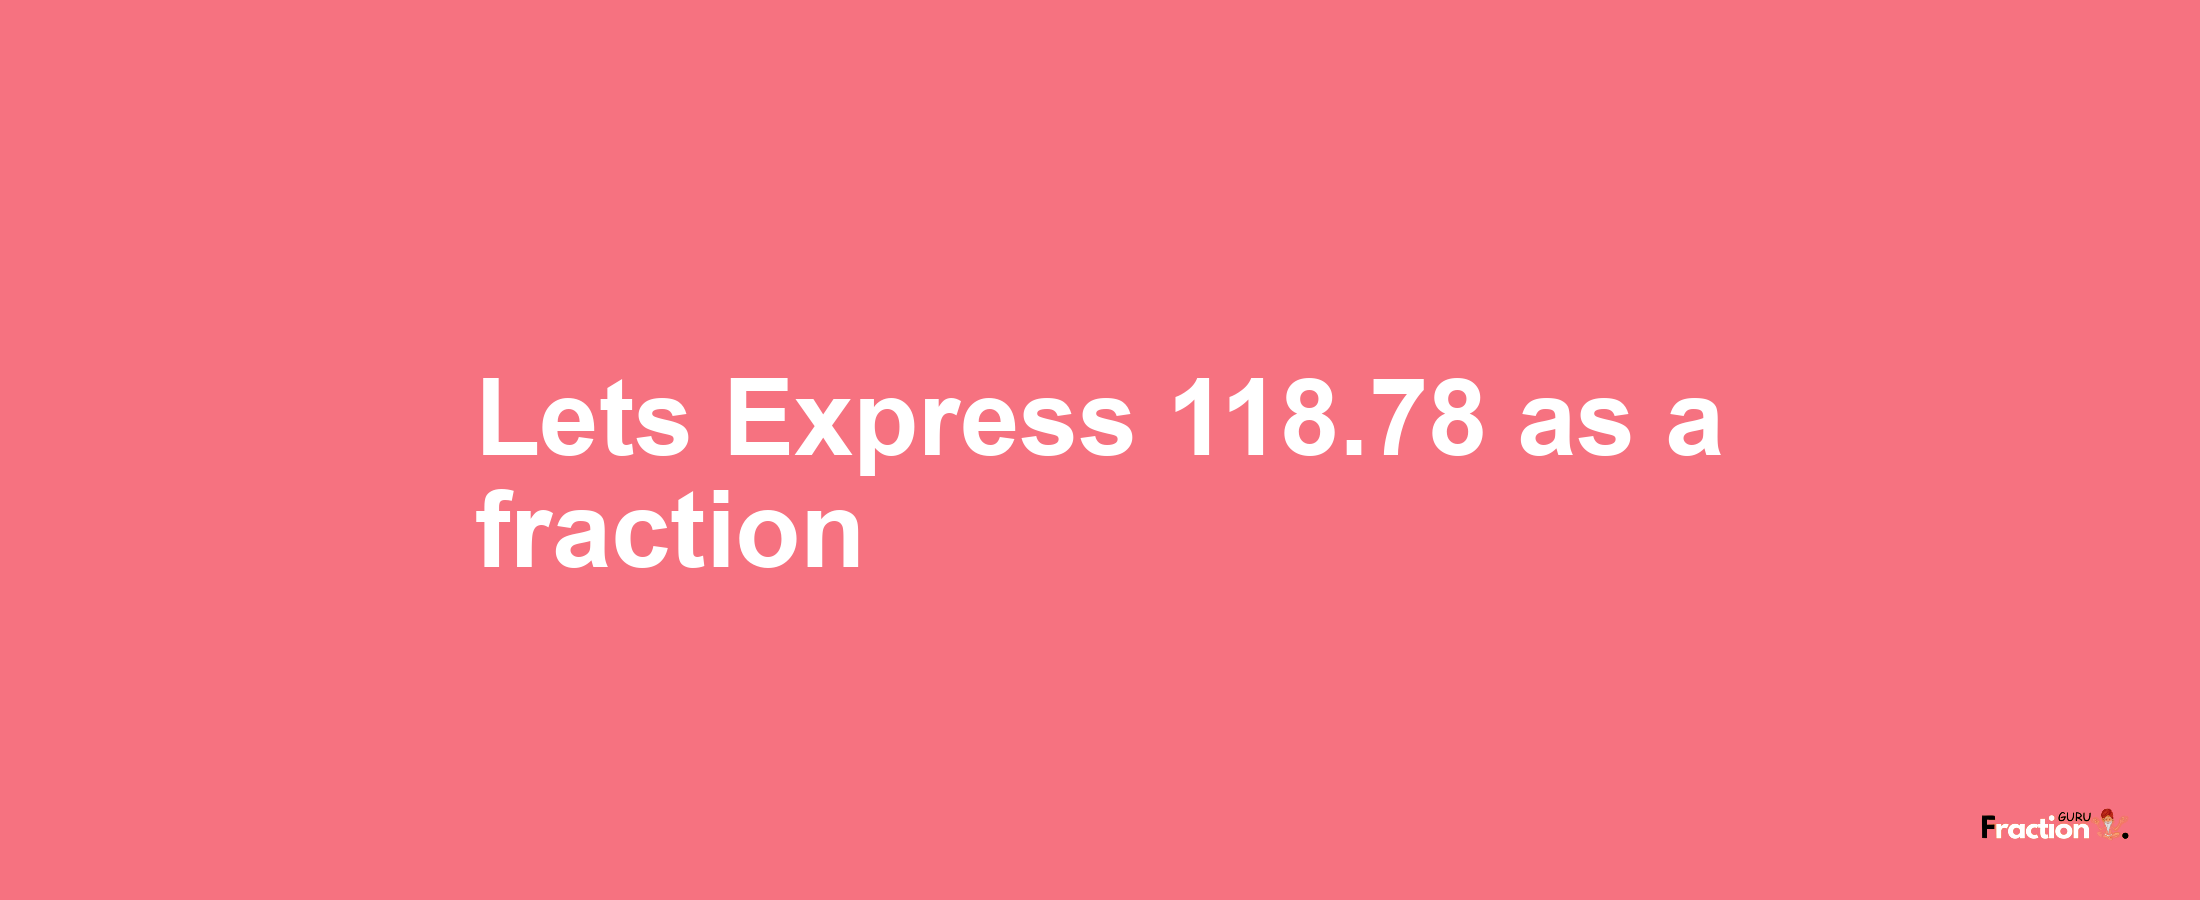 Lets Express 118.78 as afraction